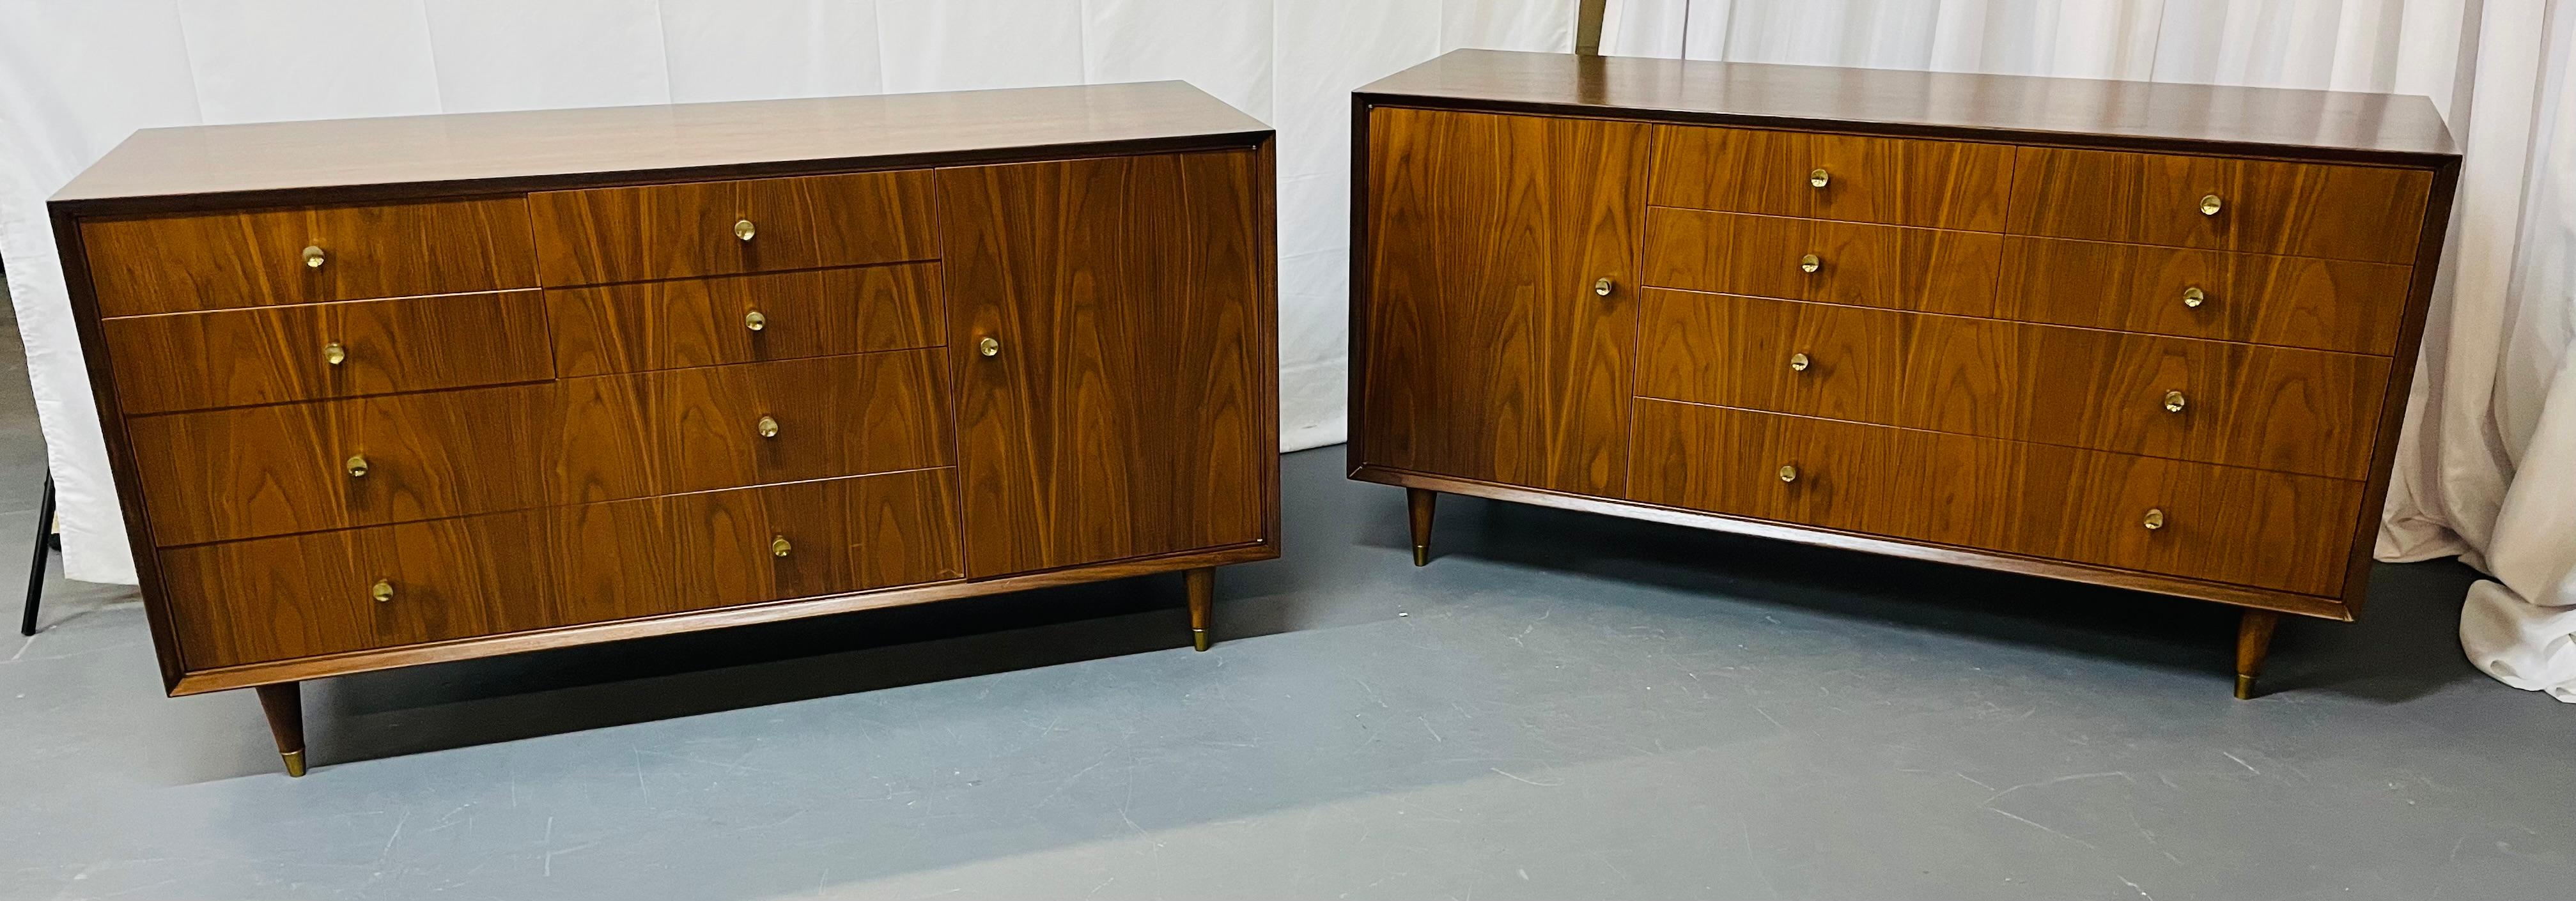 Pair of Mid-Century Modern Chests, Dressers Bedside Stands, Opposing, Refinished For Sale 2